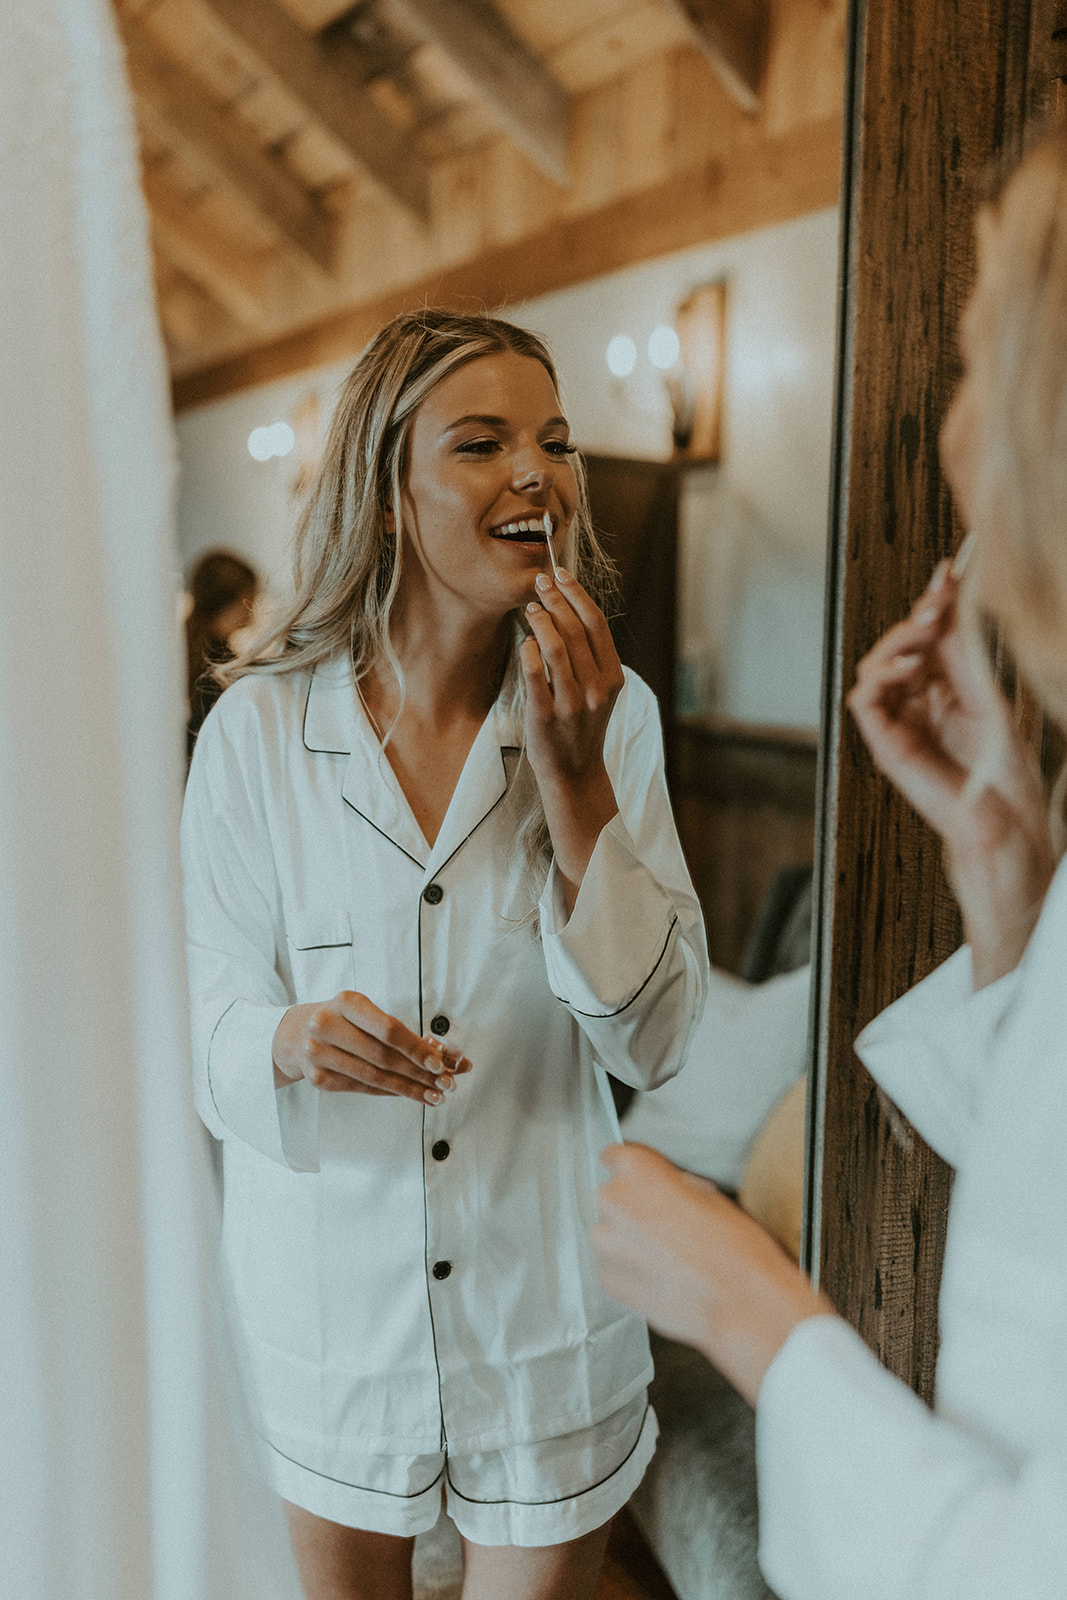 Bride getting ready for the wedding at The Lincoln Marriott Cornhusker Hotel, taken by McKenna Christine Photography